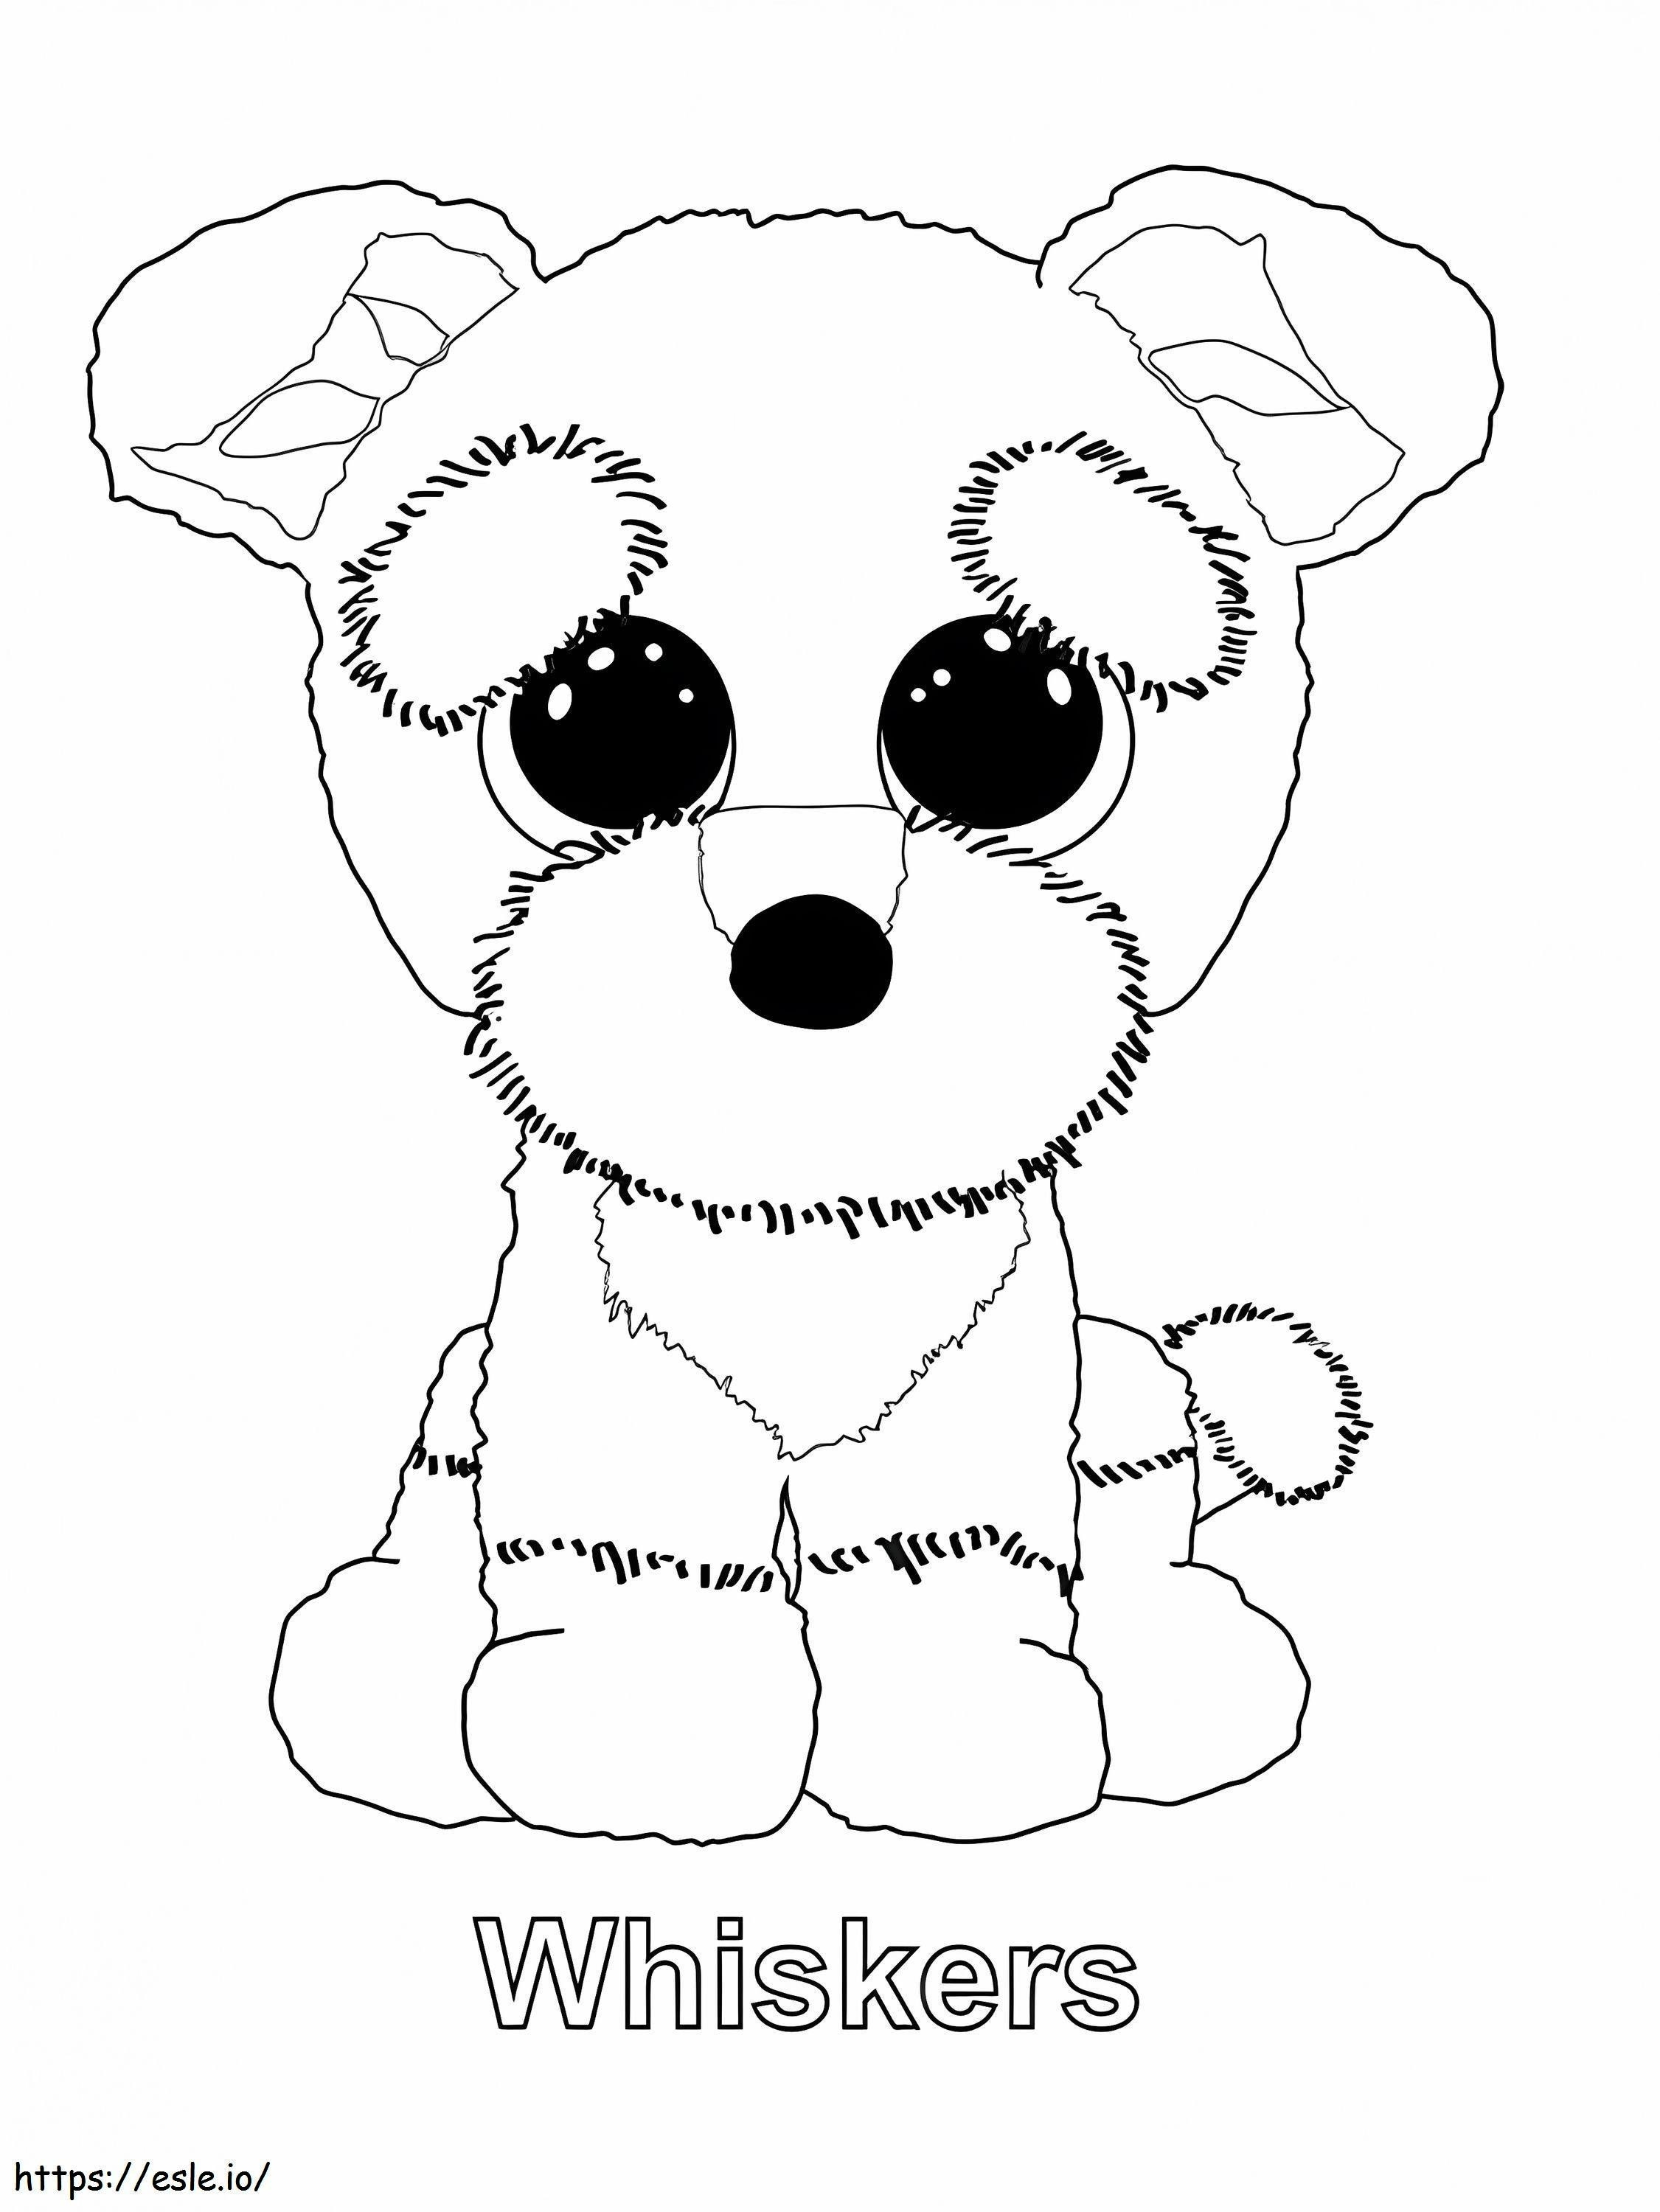 1584153661 Beanie Boo Lovely Cute Puppy Theog Of Pictures Boos That People Draw Free coloring page